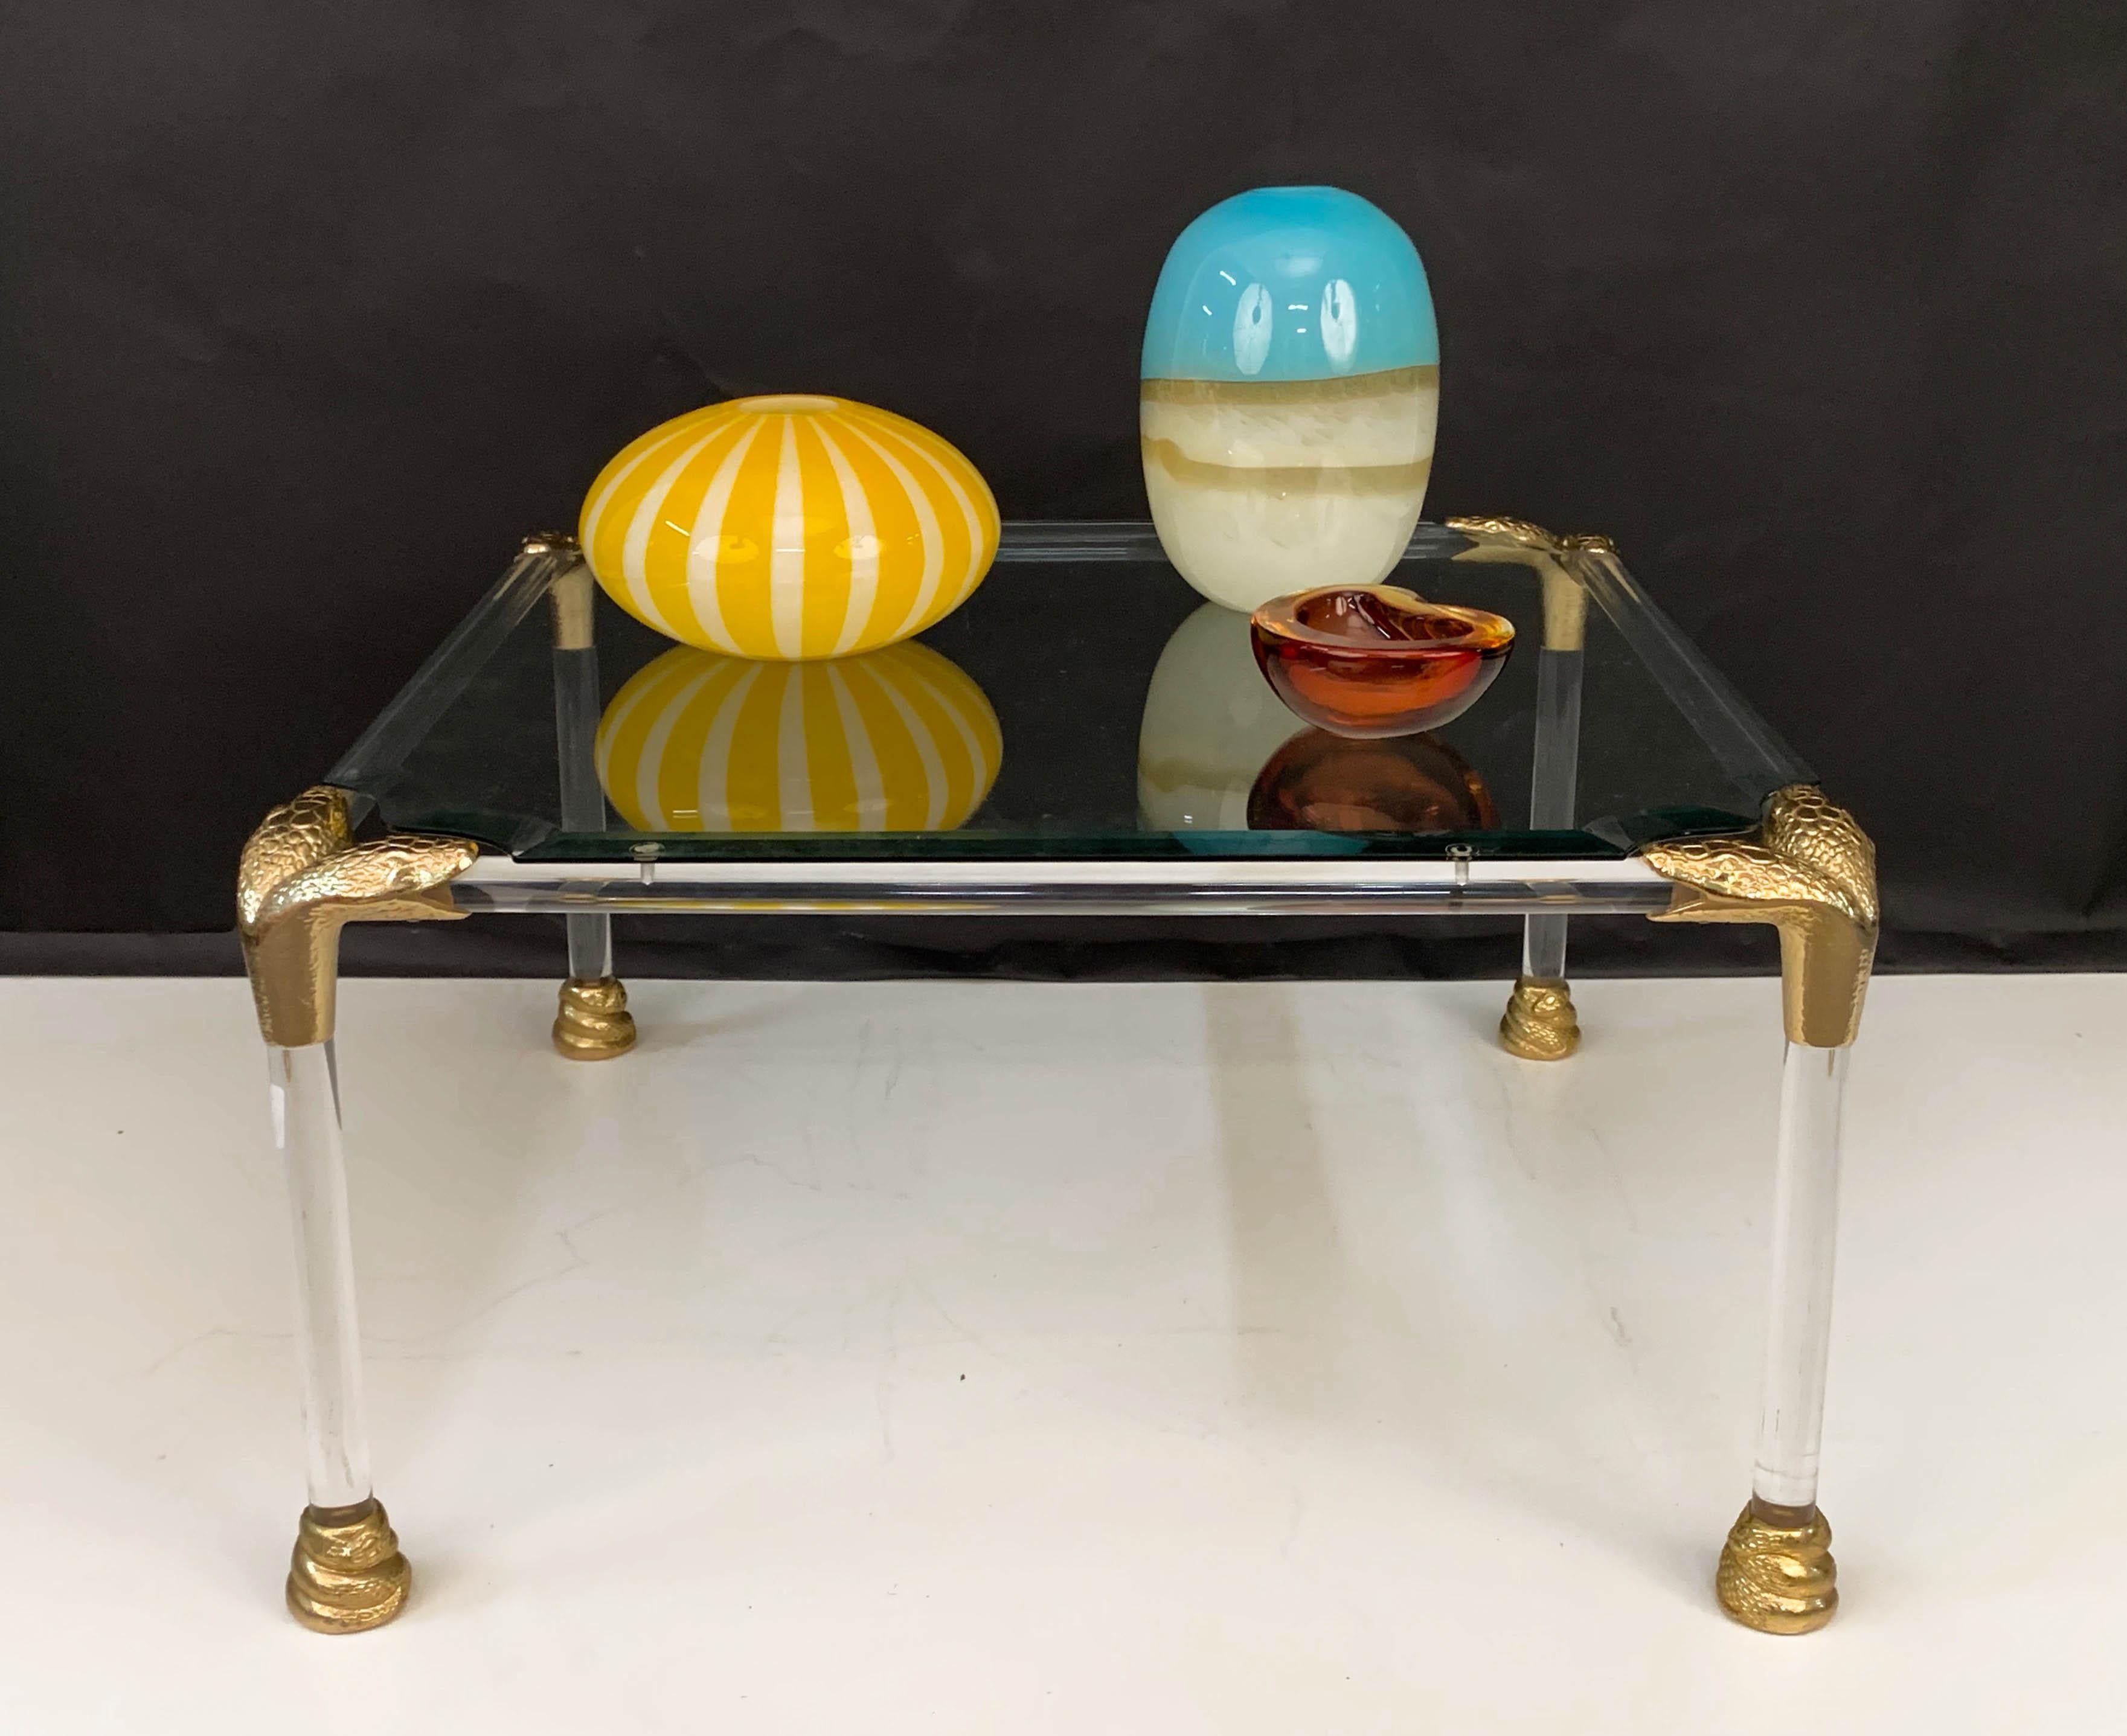 Midcentury Lucite and Brass Italian Coffee Table with Snake Head Details, 1970s For Sale 2